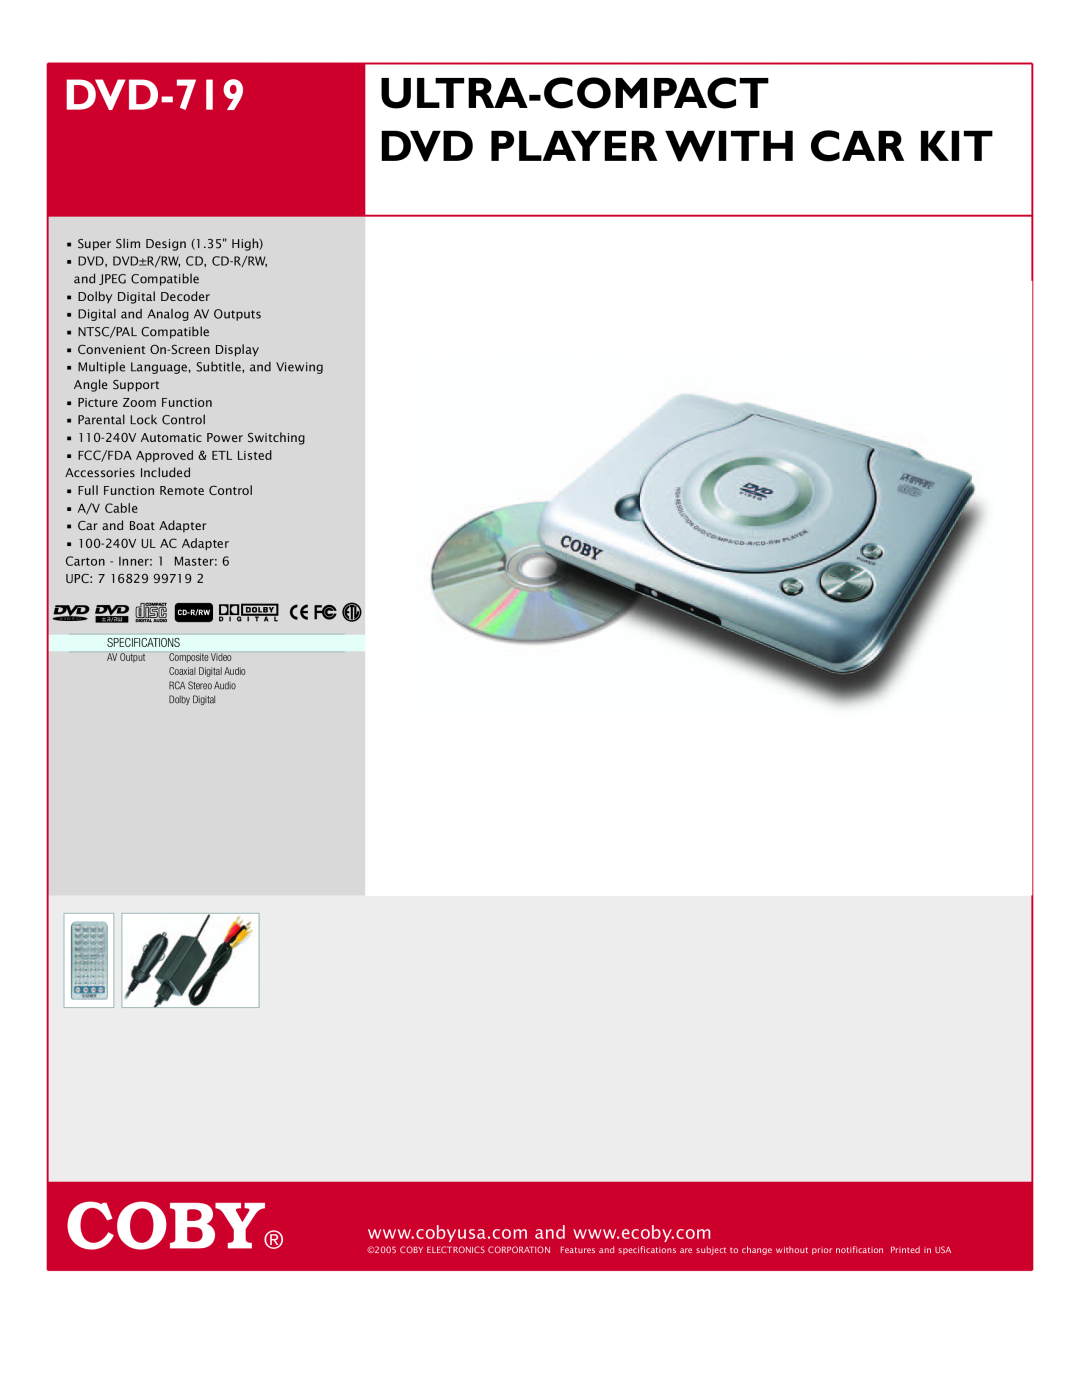 COBY electronic specifications Coby, DVD-719 ULTRA-COMPACT DVD PLAYER WITH CAR KIT 